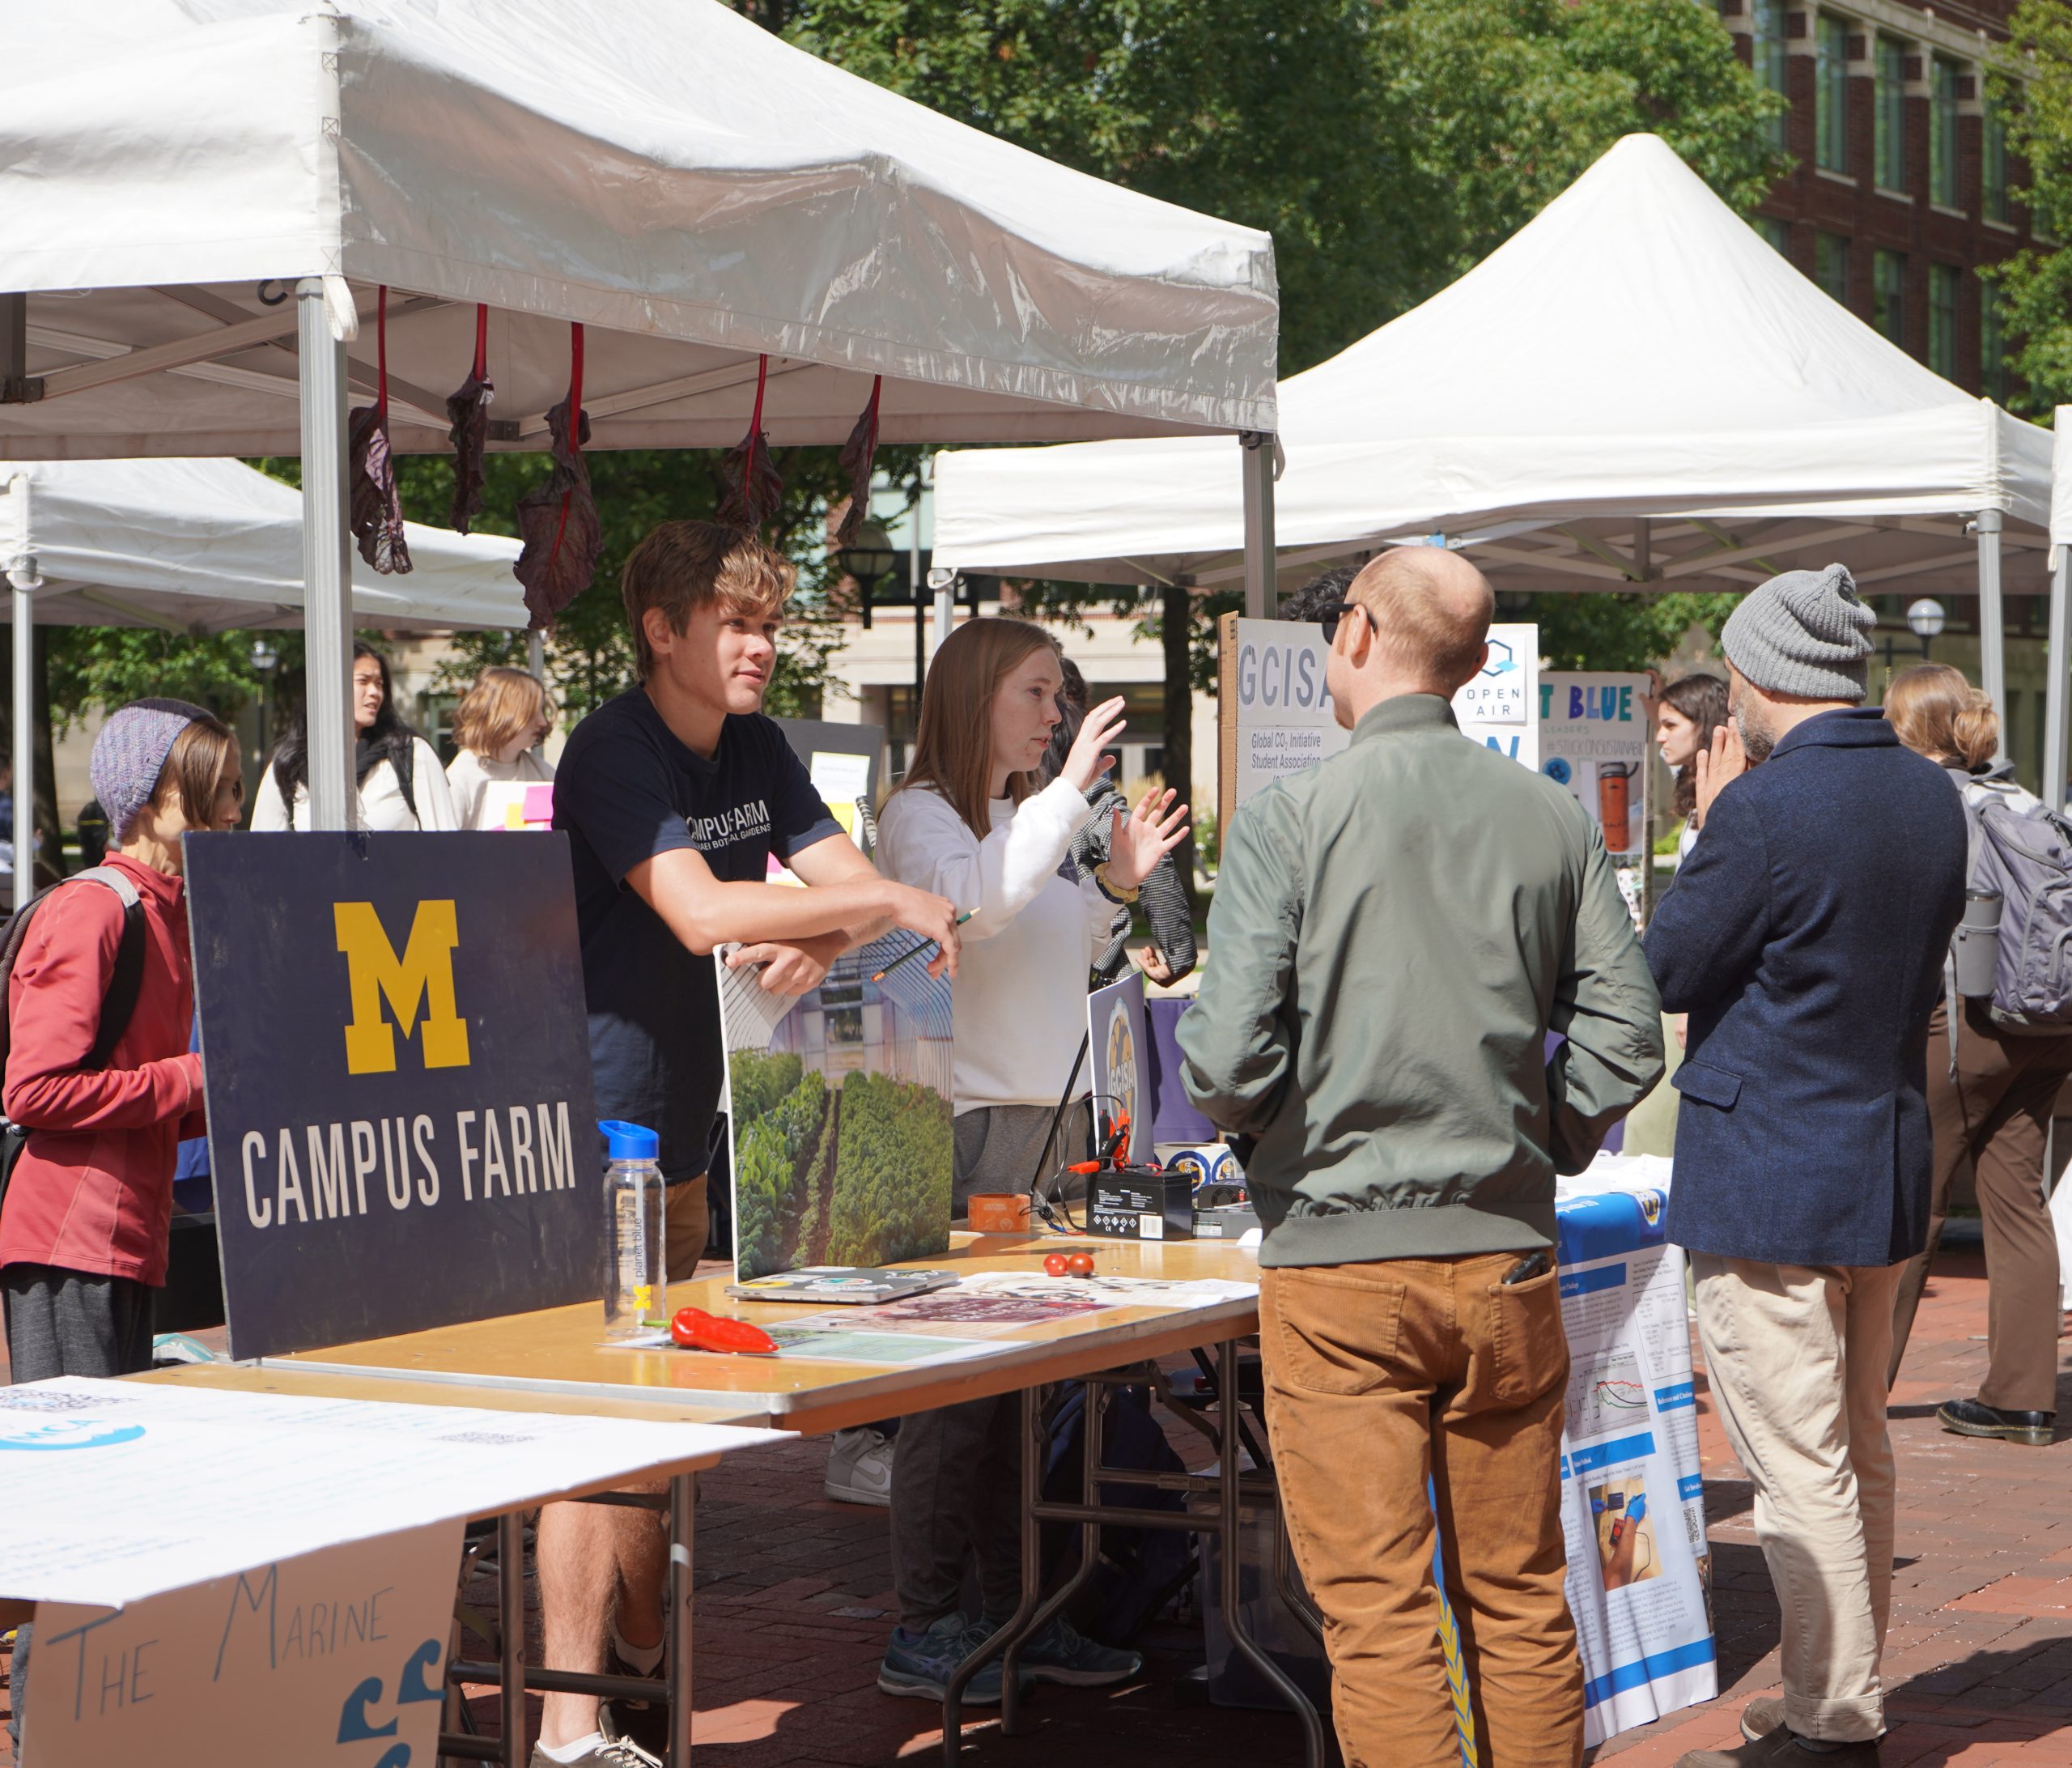 Students presenting the U-M Campus Farm at an event on the diag.